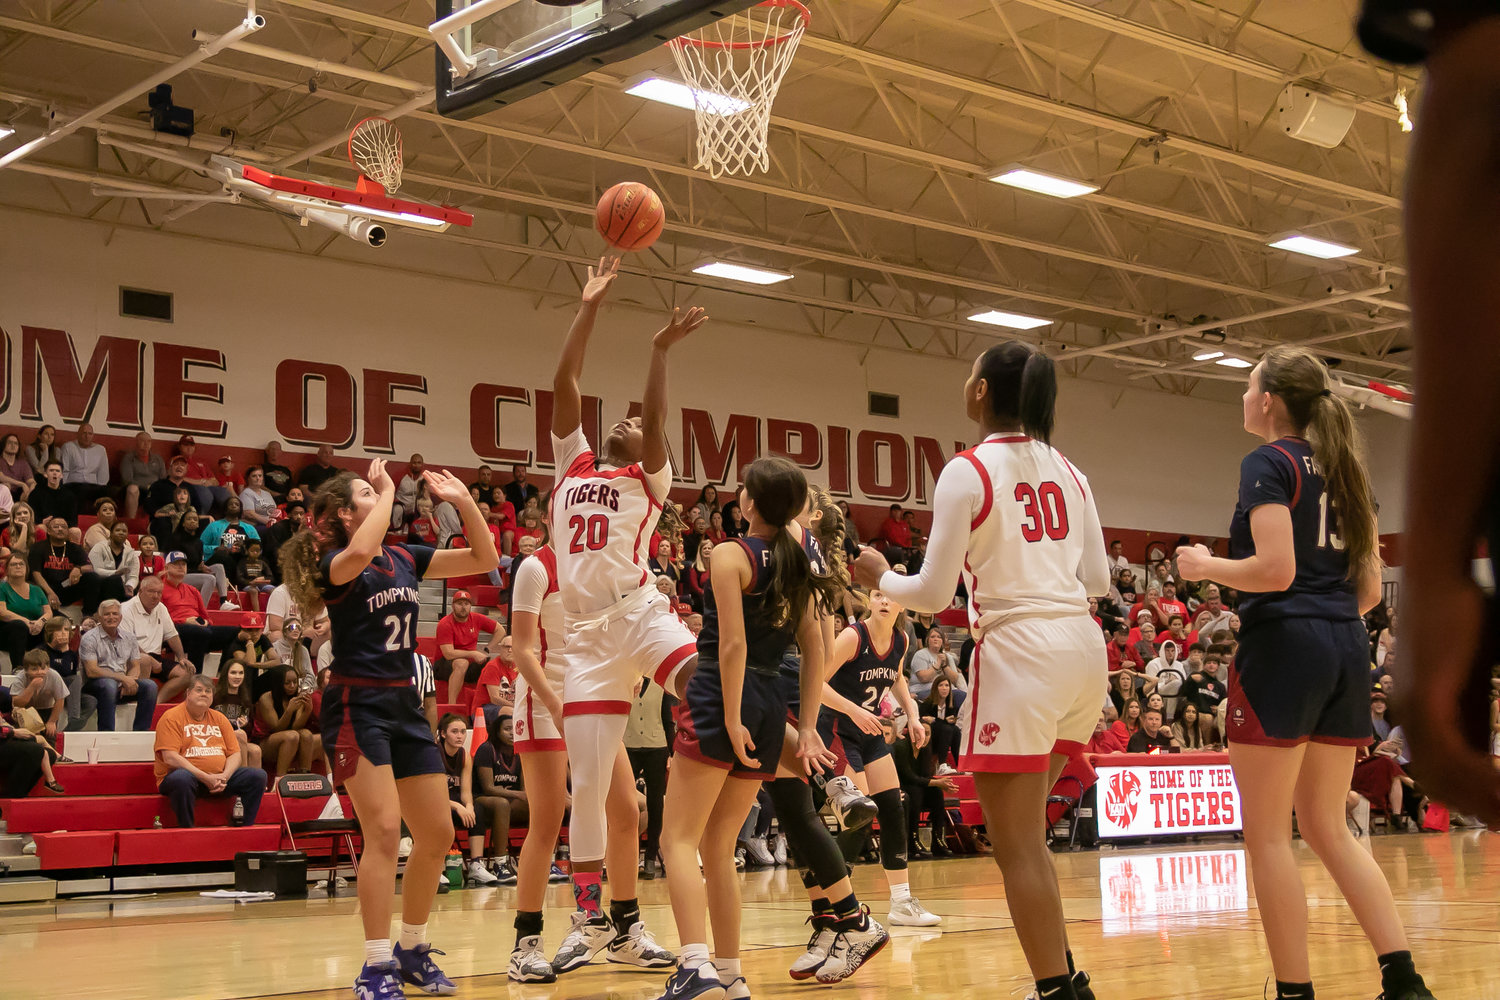 Brianna Nelson shoots a layup during Tuesday's game between Katy and Tompkins at the Katy gym.